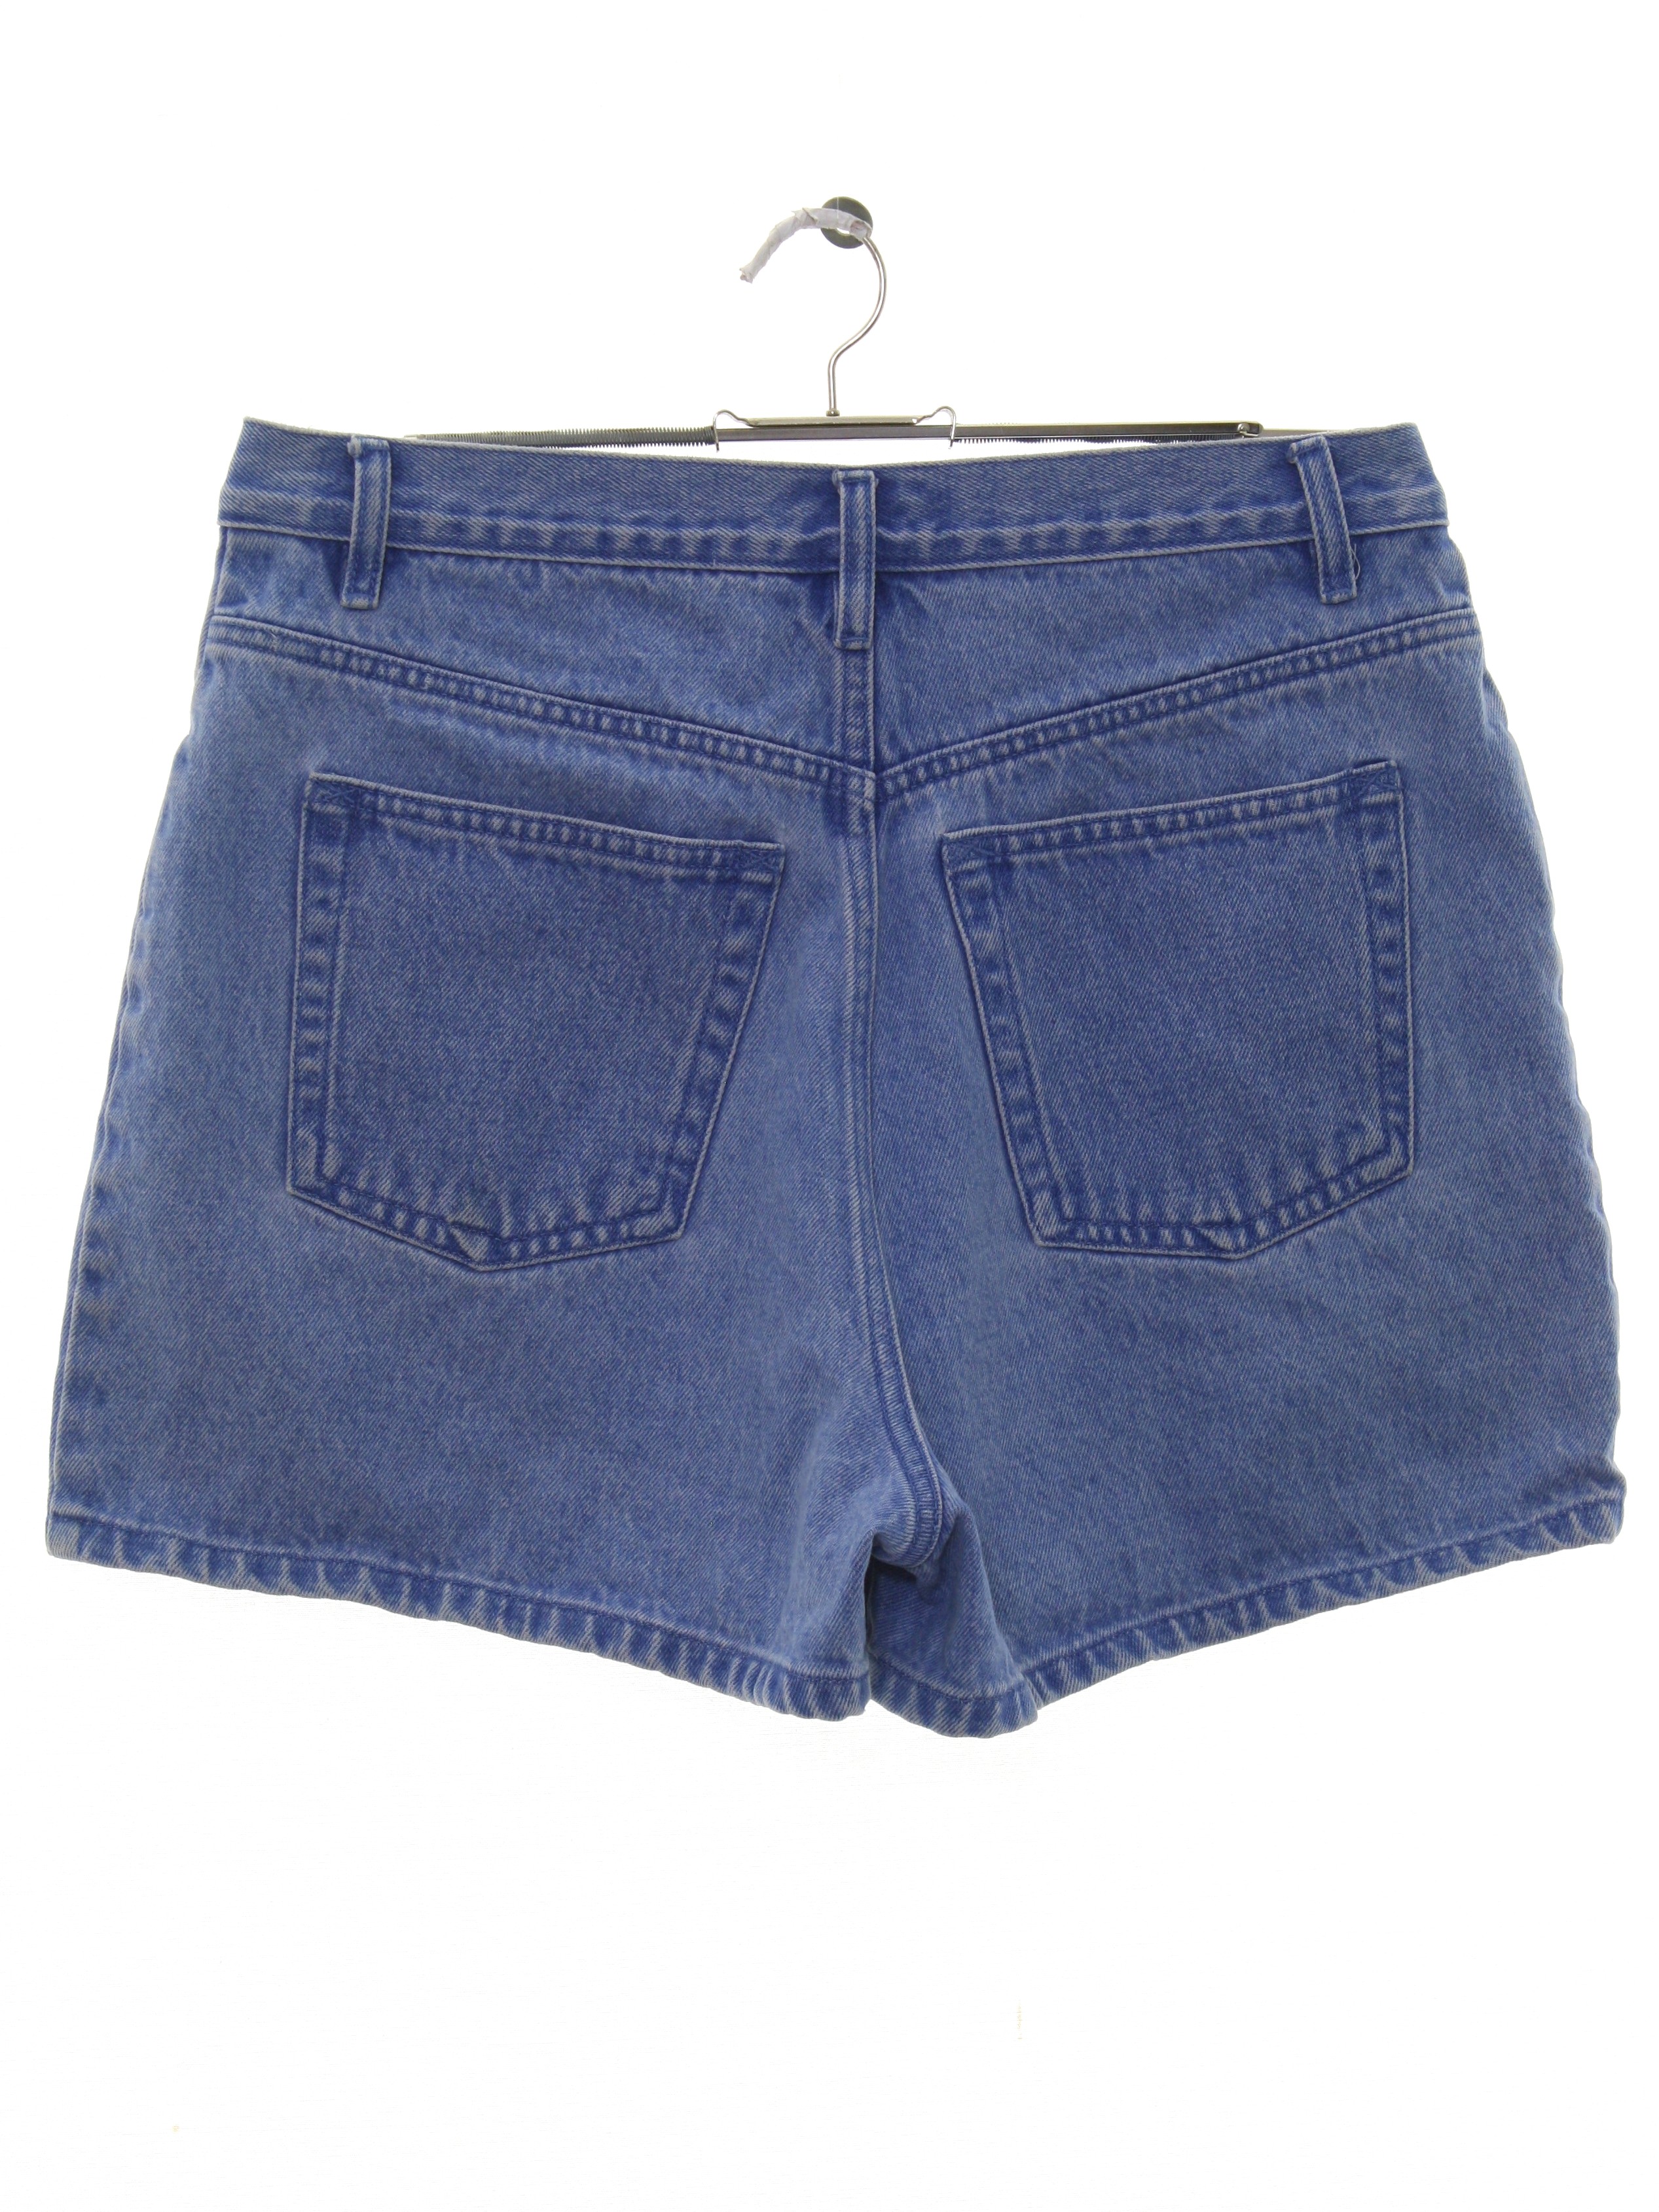 90s Retro Shorts: 90s -BE Blues- Womens bright blue over dyed ...